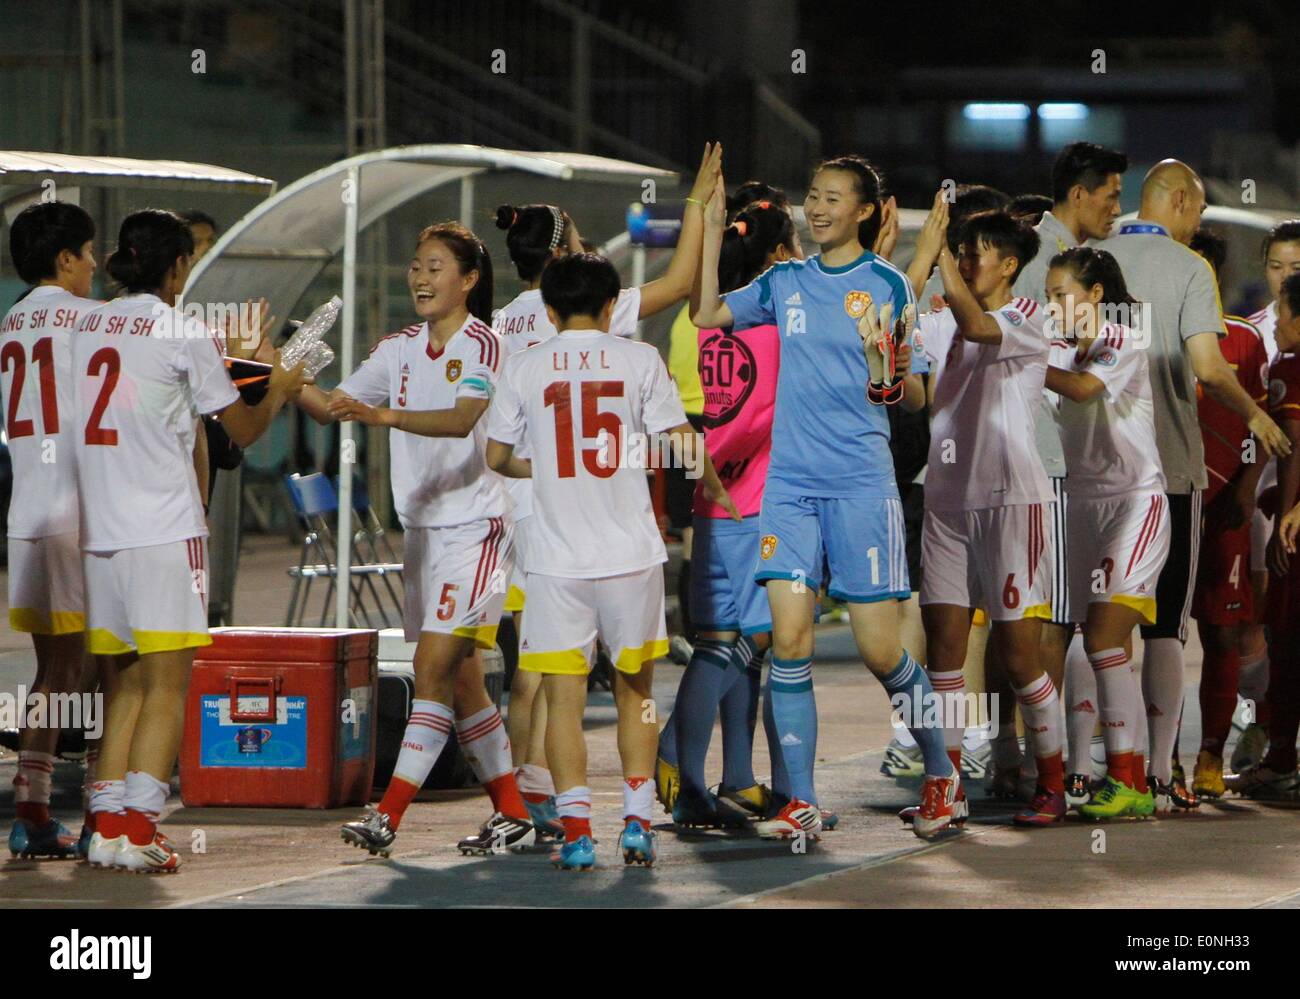 Ho Chi Minh, Vietnam. 17th May, 2014. Players of China celebrate after the match against Myanmar during the 2014 AFC Women's Asian Cup held at Thong Nhat Stadium in Ho Chi Minh city, Vietnam, May 17, 2014. China advanced to World Cup after beating Myanmar 3-0. © Nguyen Le Huyen/Xinhua/Alamy Live News Stock Photo